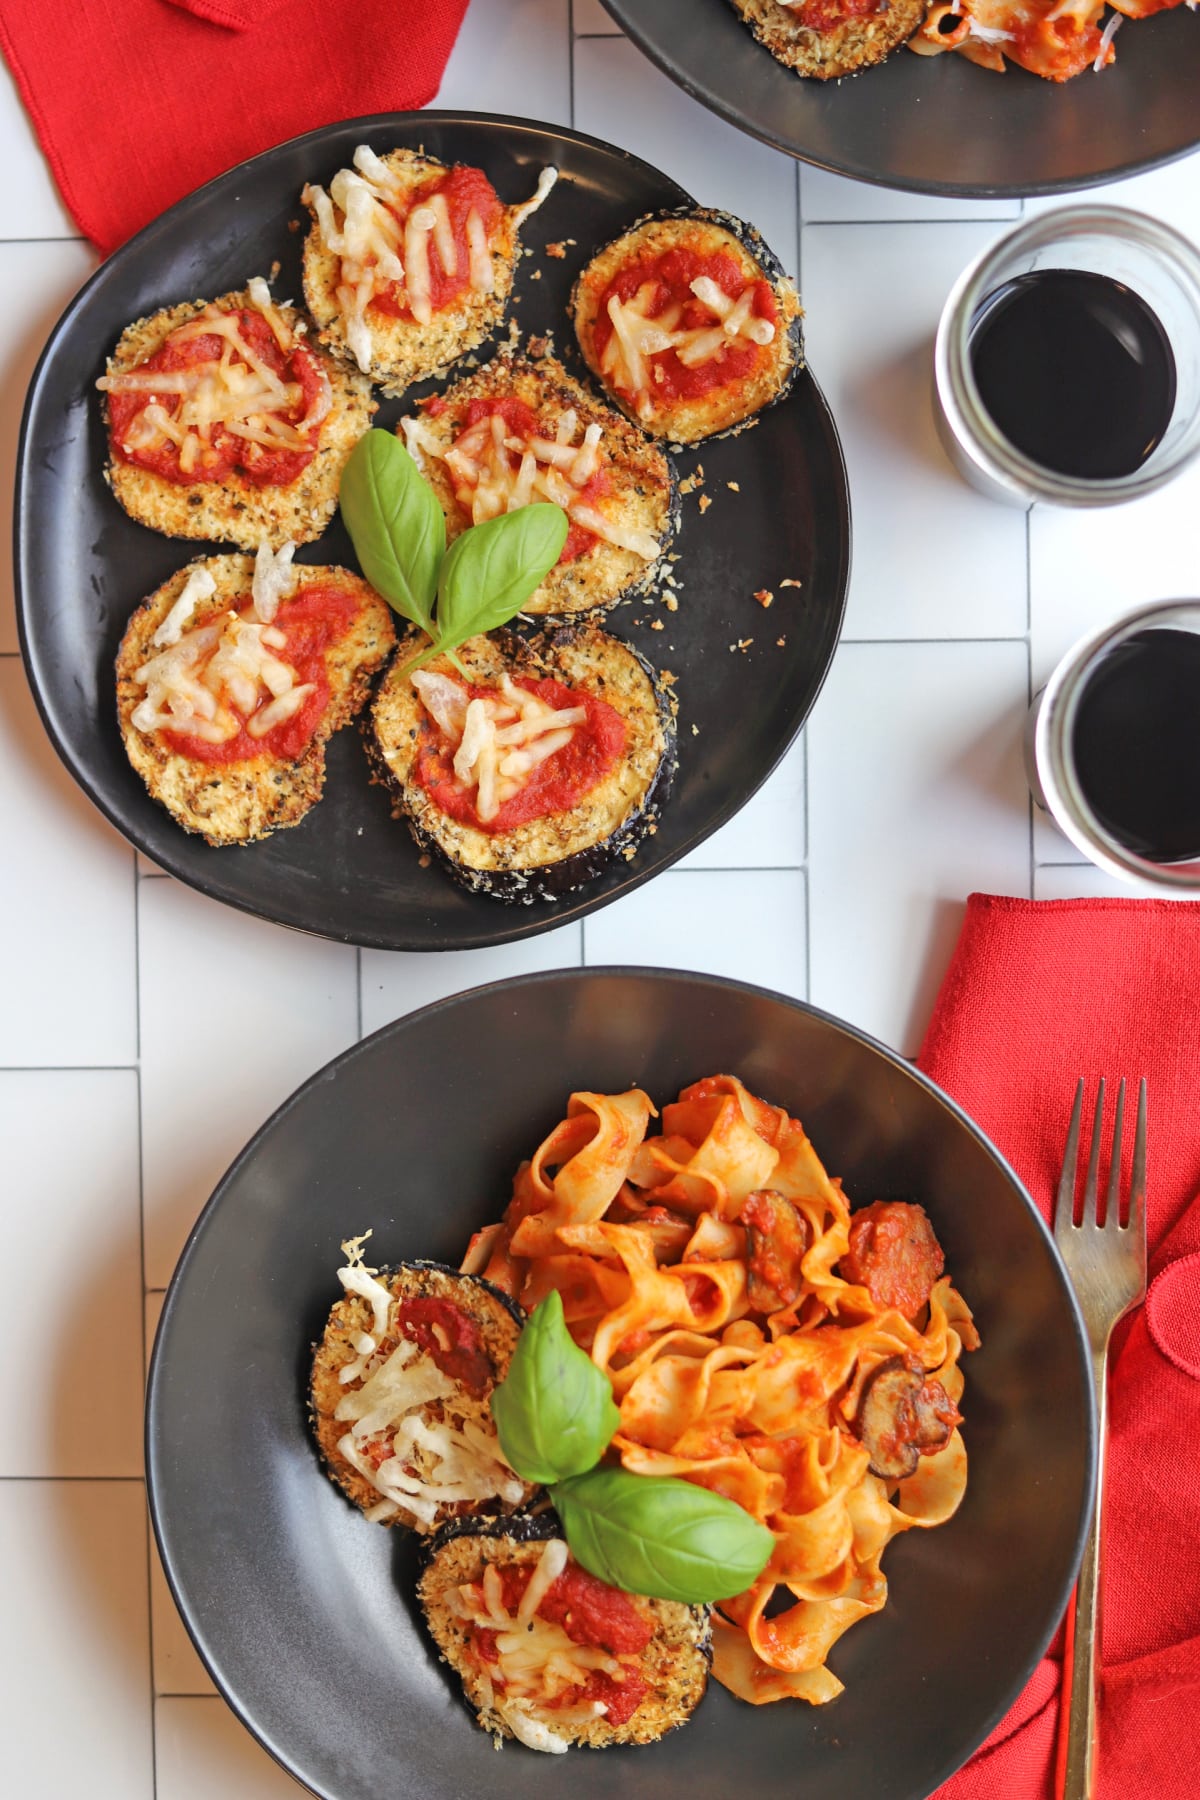 Breaded eggplant slices by bowl of pasta with basil garnish.